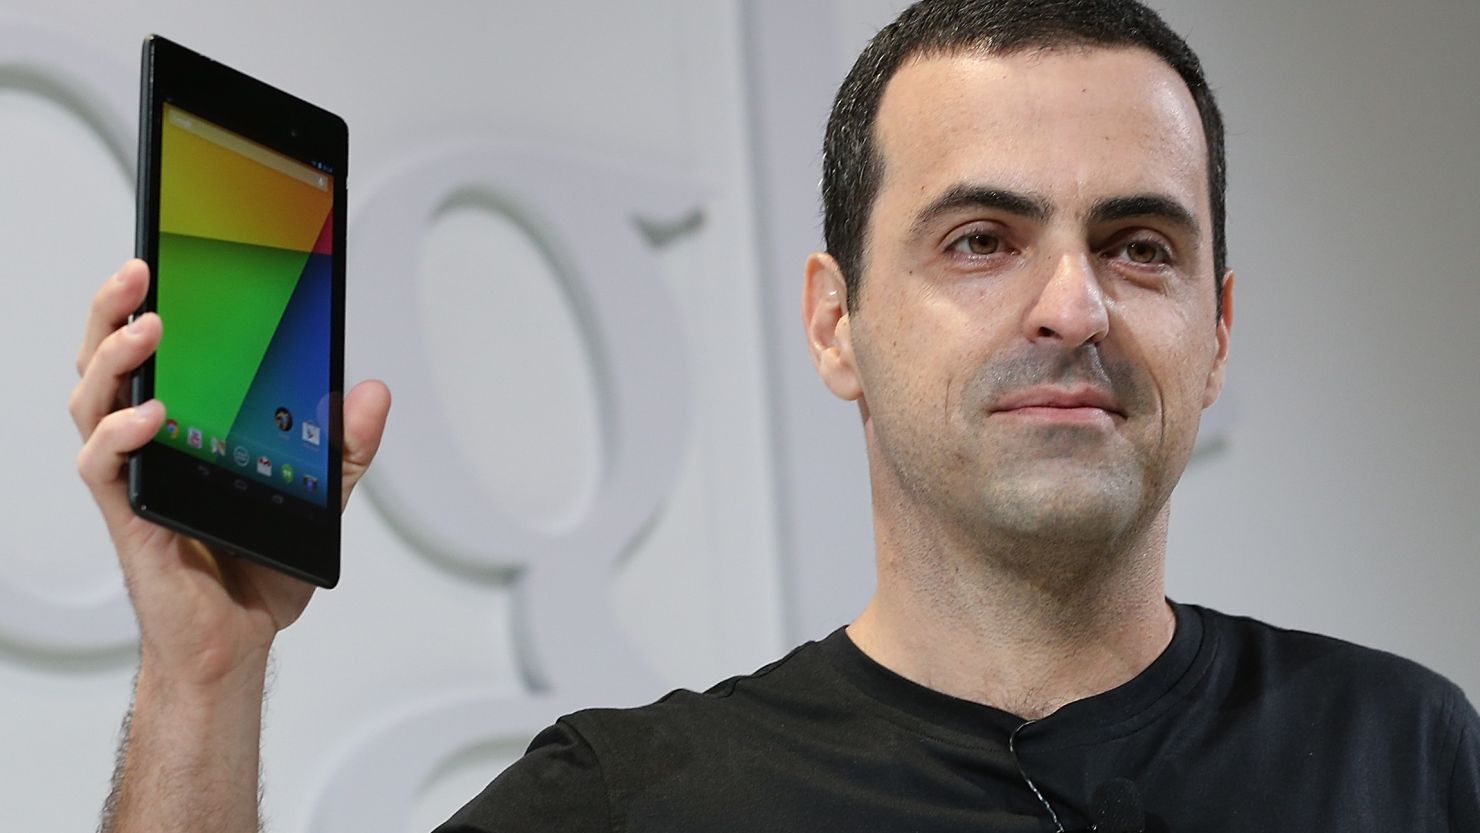 Hugo Barra, vice president of Android product management at Google, holds up a new Nexus 7 tablet Wednesday.